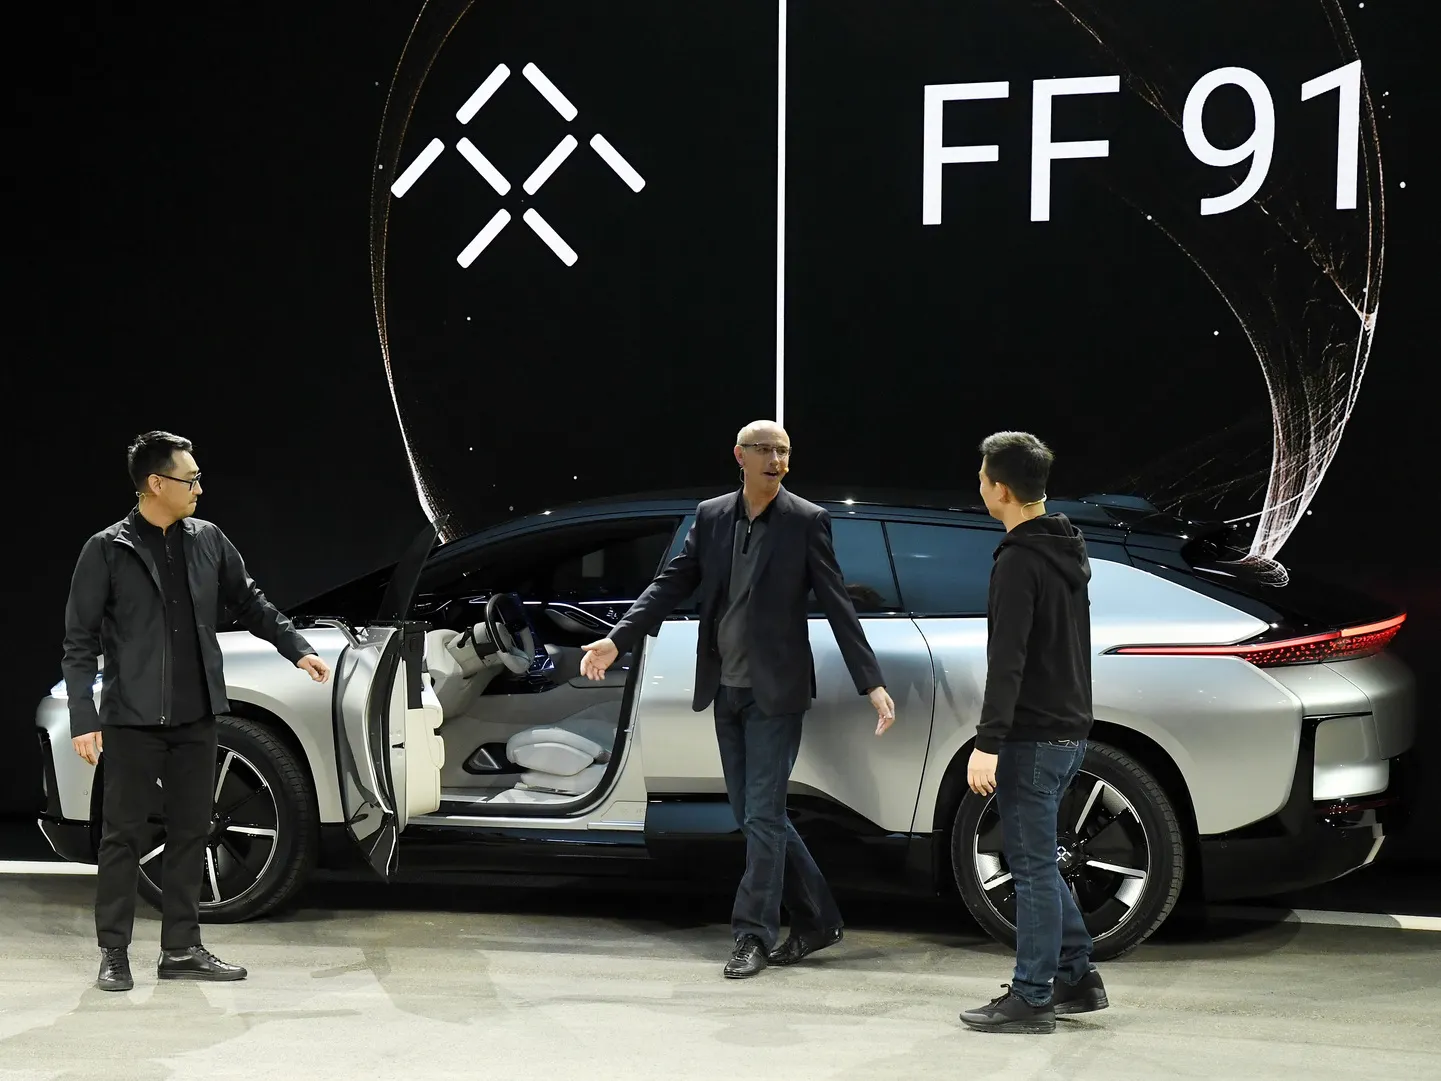 Faraday Future Intelligent Electric ffie Stock Tumbles As First Car Delivery Faces Further Delays